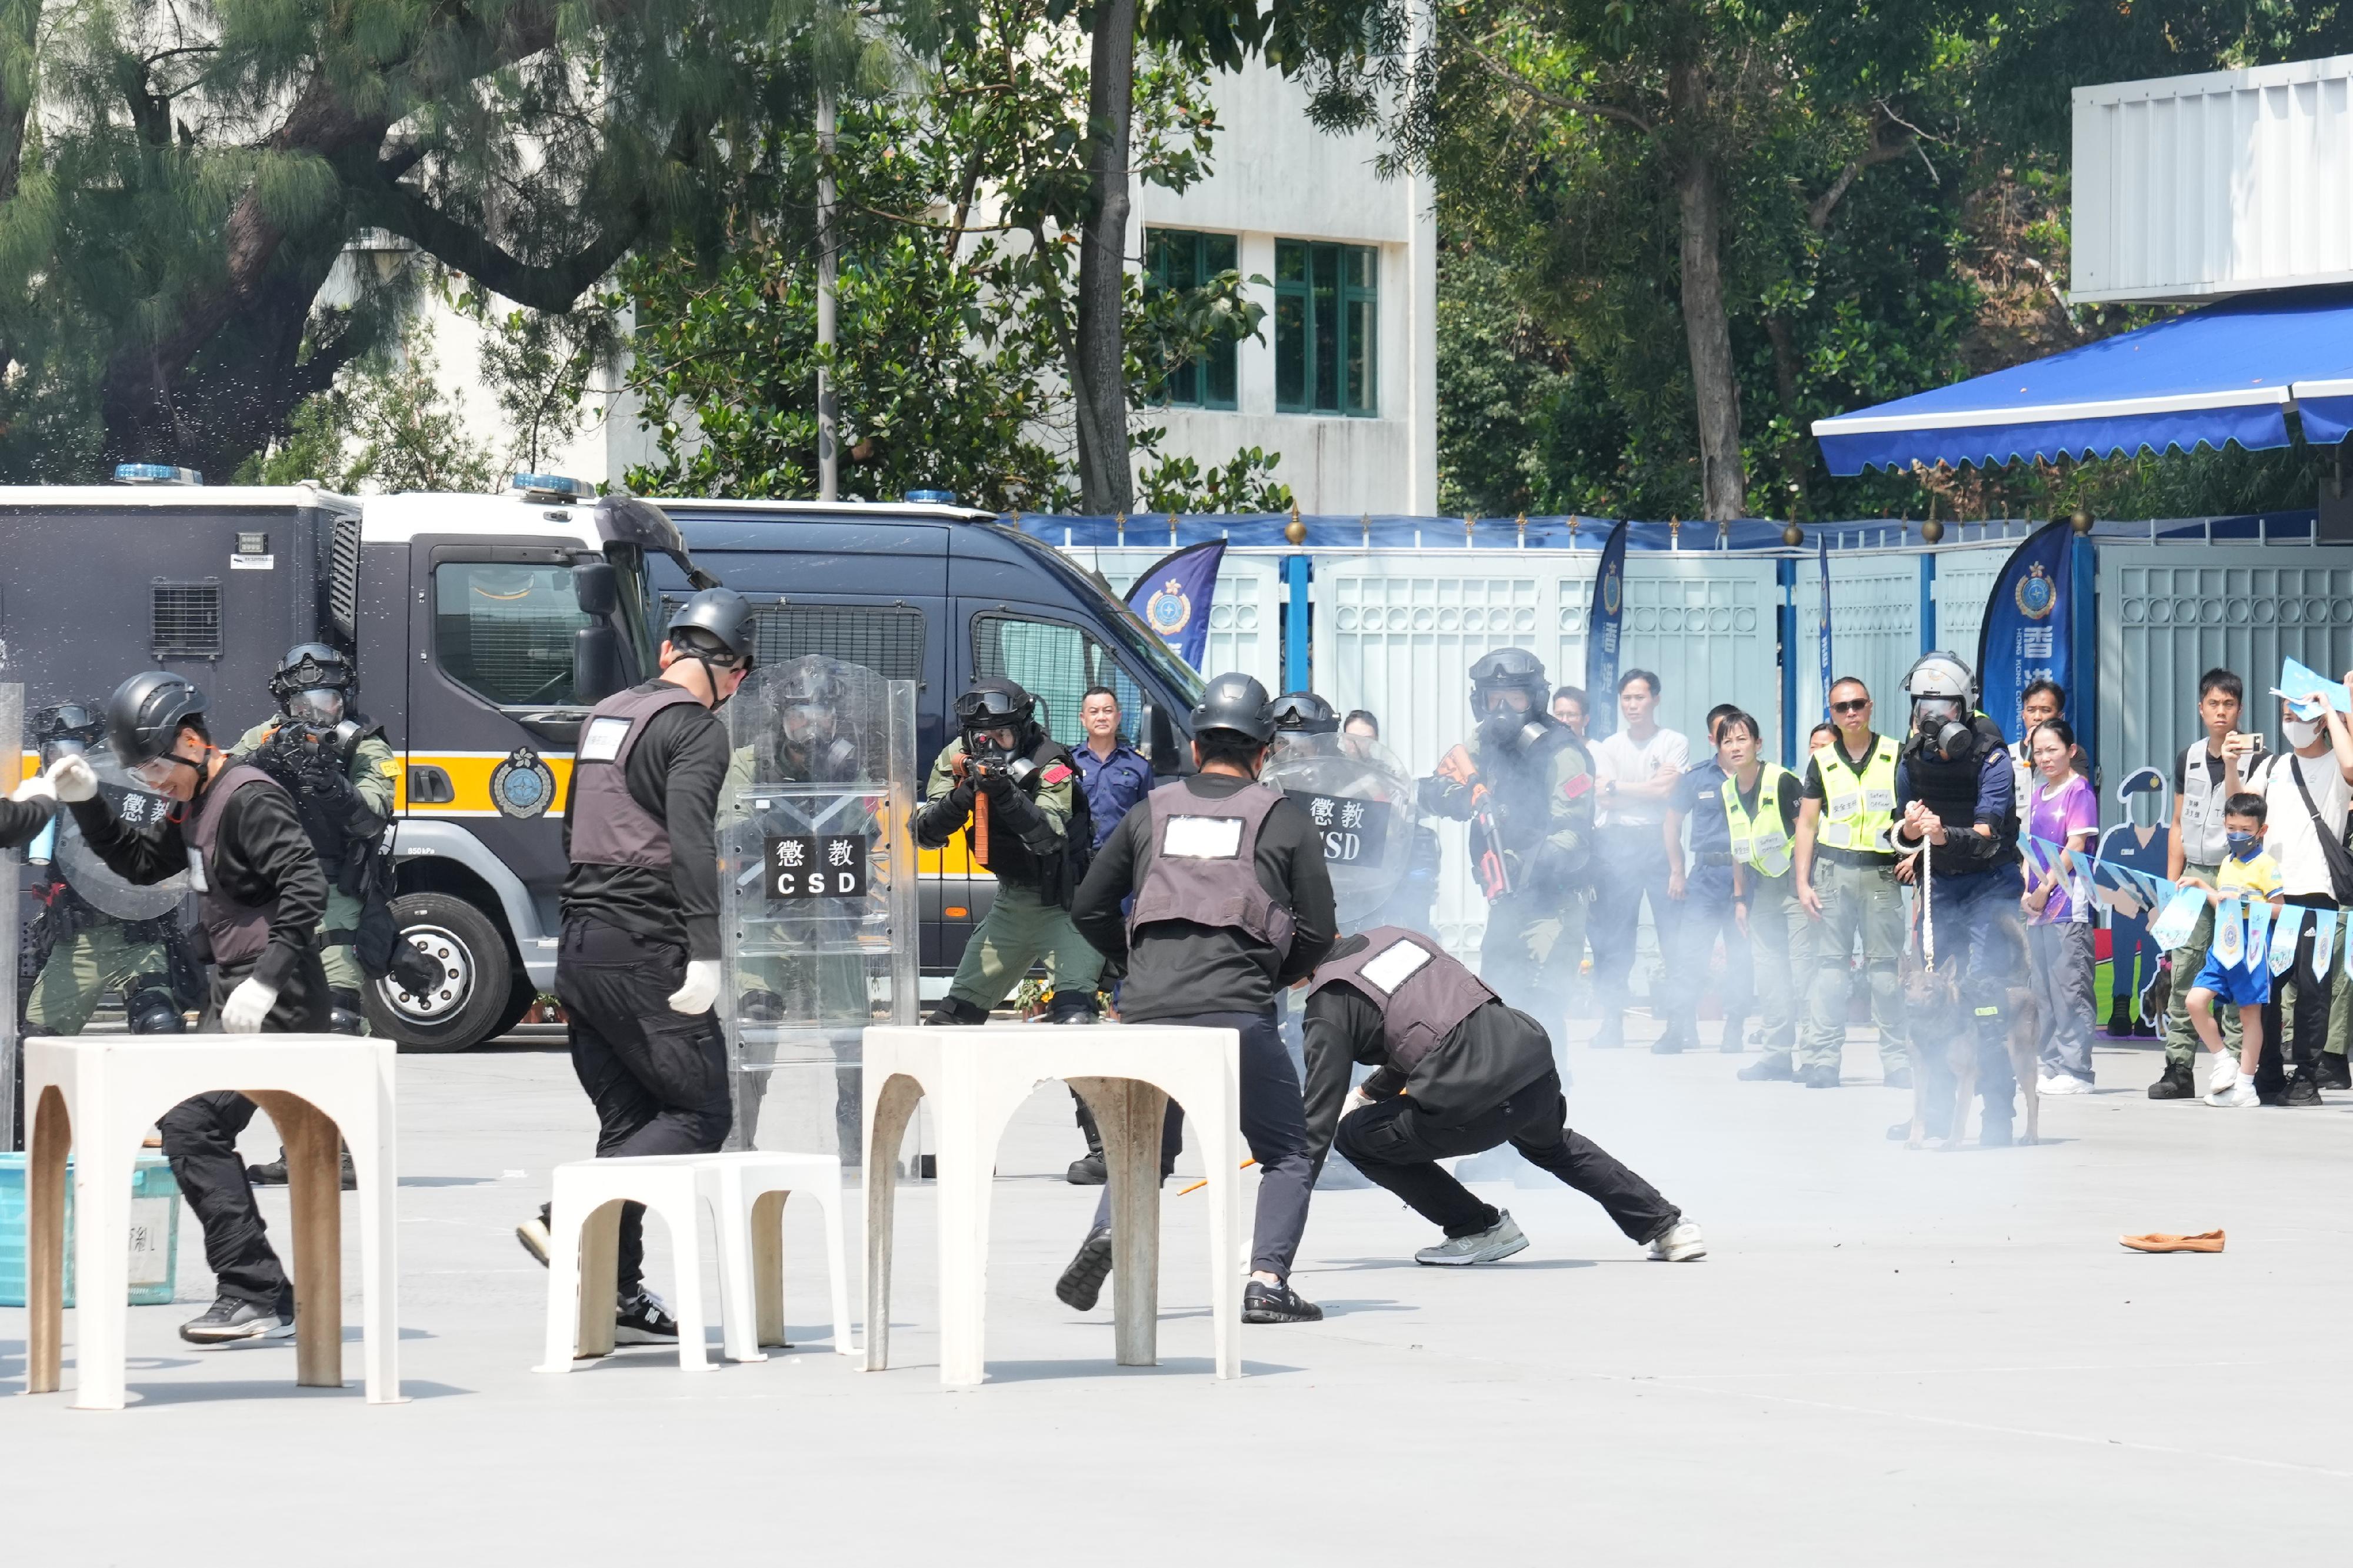 To support National Security Education Day on April 15, the Correctional Services Department held an open day at the Hong Kong Correctional Services Academy today (April 13) to raise public awareness of national security and enhance public understanding of its work in safeguarding national security. Photo shows a tactical demonstration by the Regional Response Team.